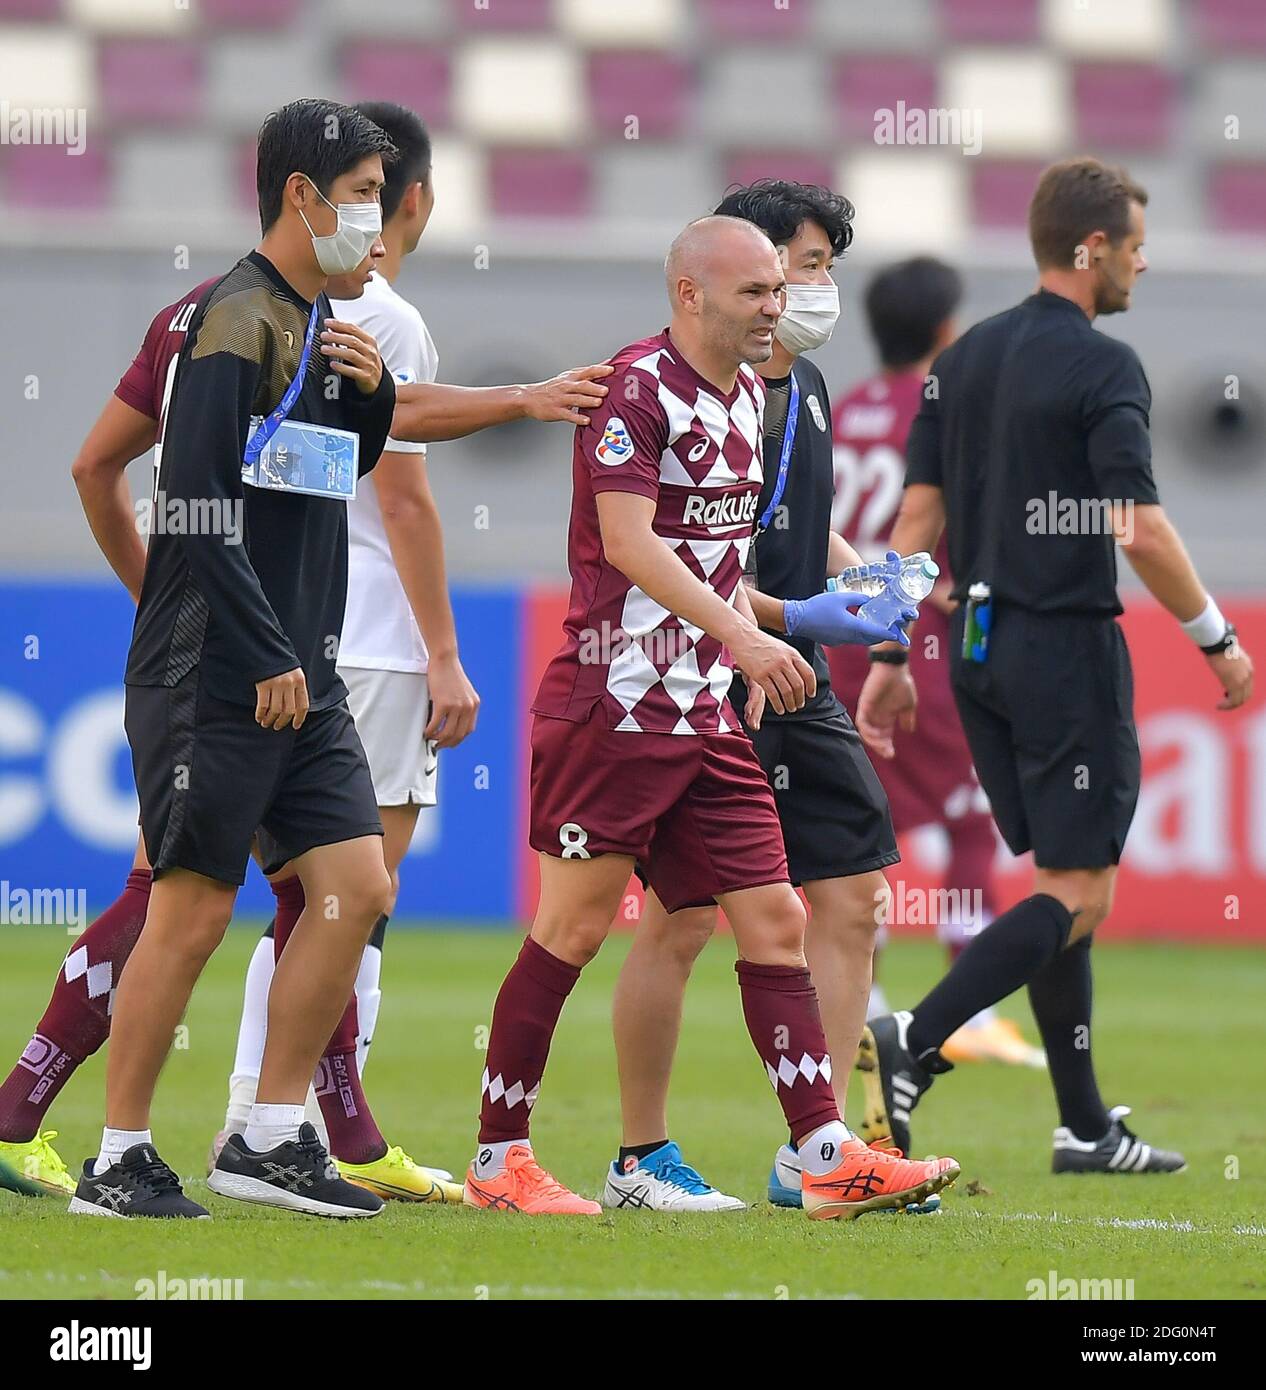 Doha, Qatar. 7th Dec, 2020. Andres Iniesta (C) of Vissel Kobe leaves the pitch due to injury during the round of 16 match of the AFC Champions League between Shanghai SIPG FC of China and Vissel Kobe of Japan in Doha, Qatar, Dec. 7, 2020. Credit: Nikku/Xinhua/Alamy Live News Stock Photo